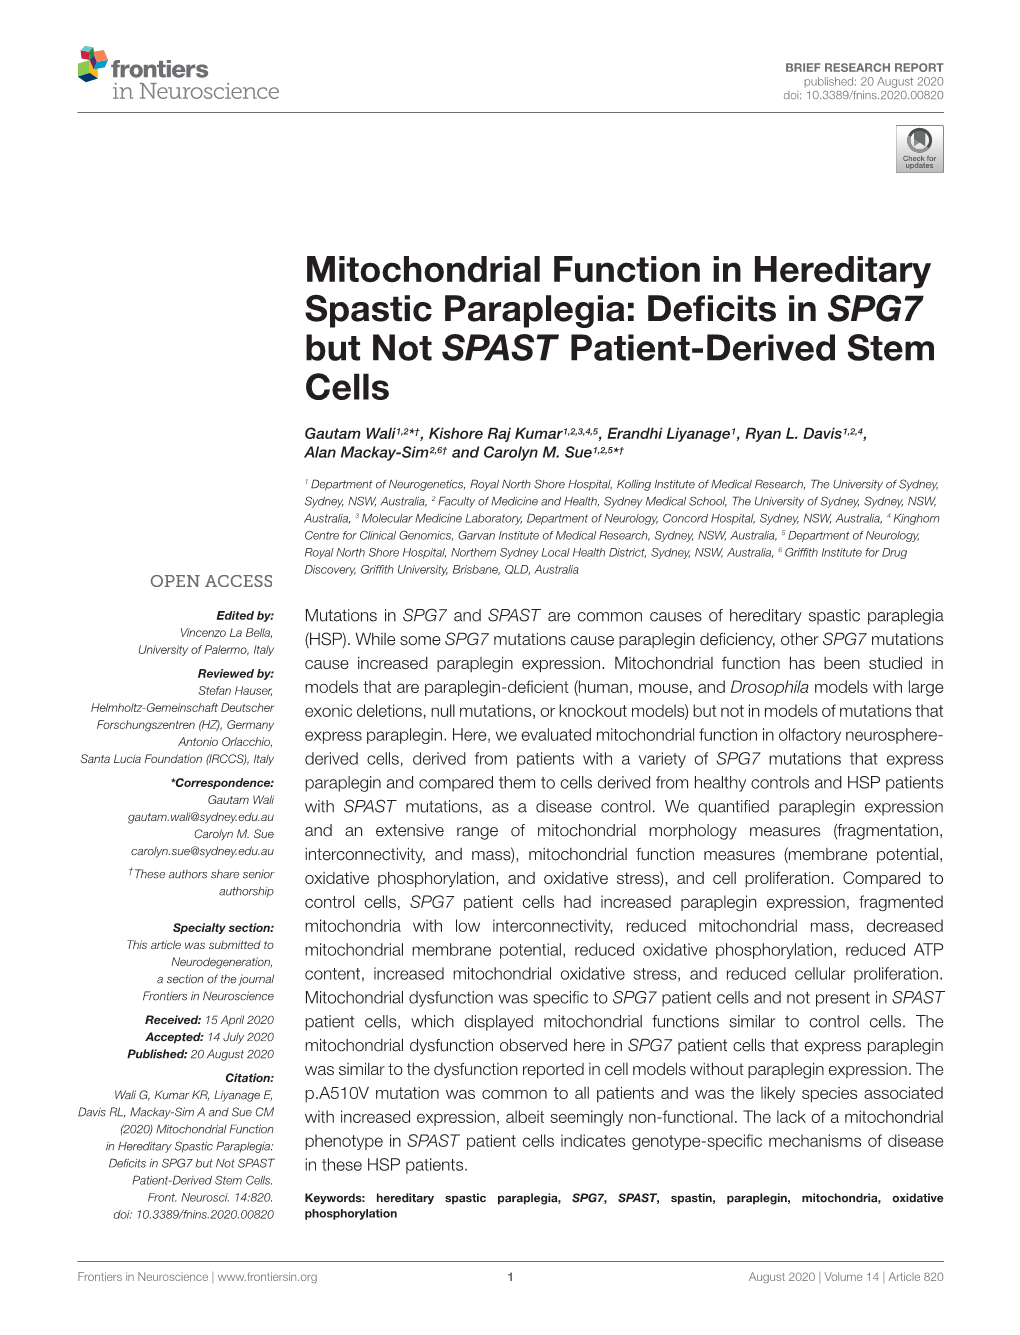 Mitochondrial Function in Hereditary Spastic Paraplegia: Deﬁcits in SPG7 but Not SPAST Patient-Derived Stem Cells